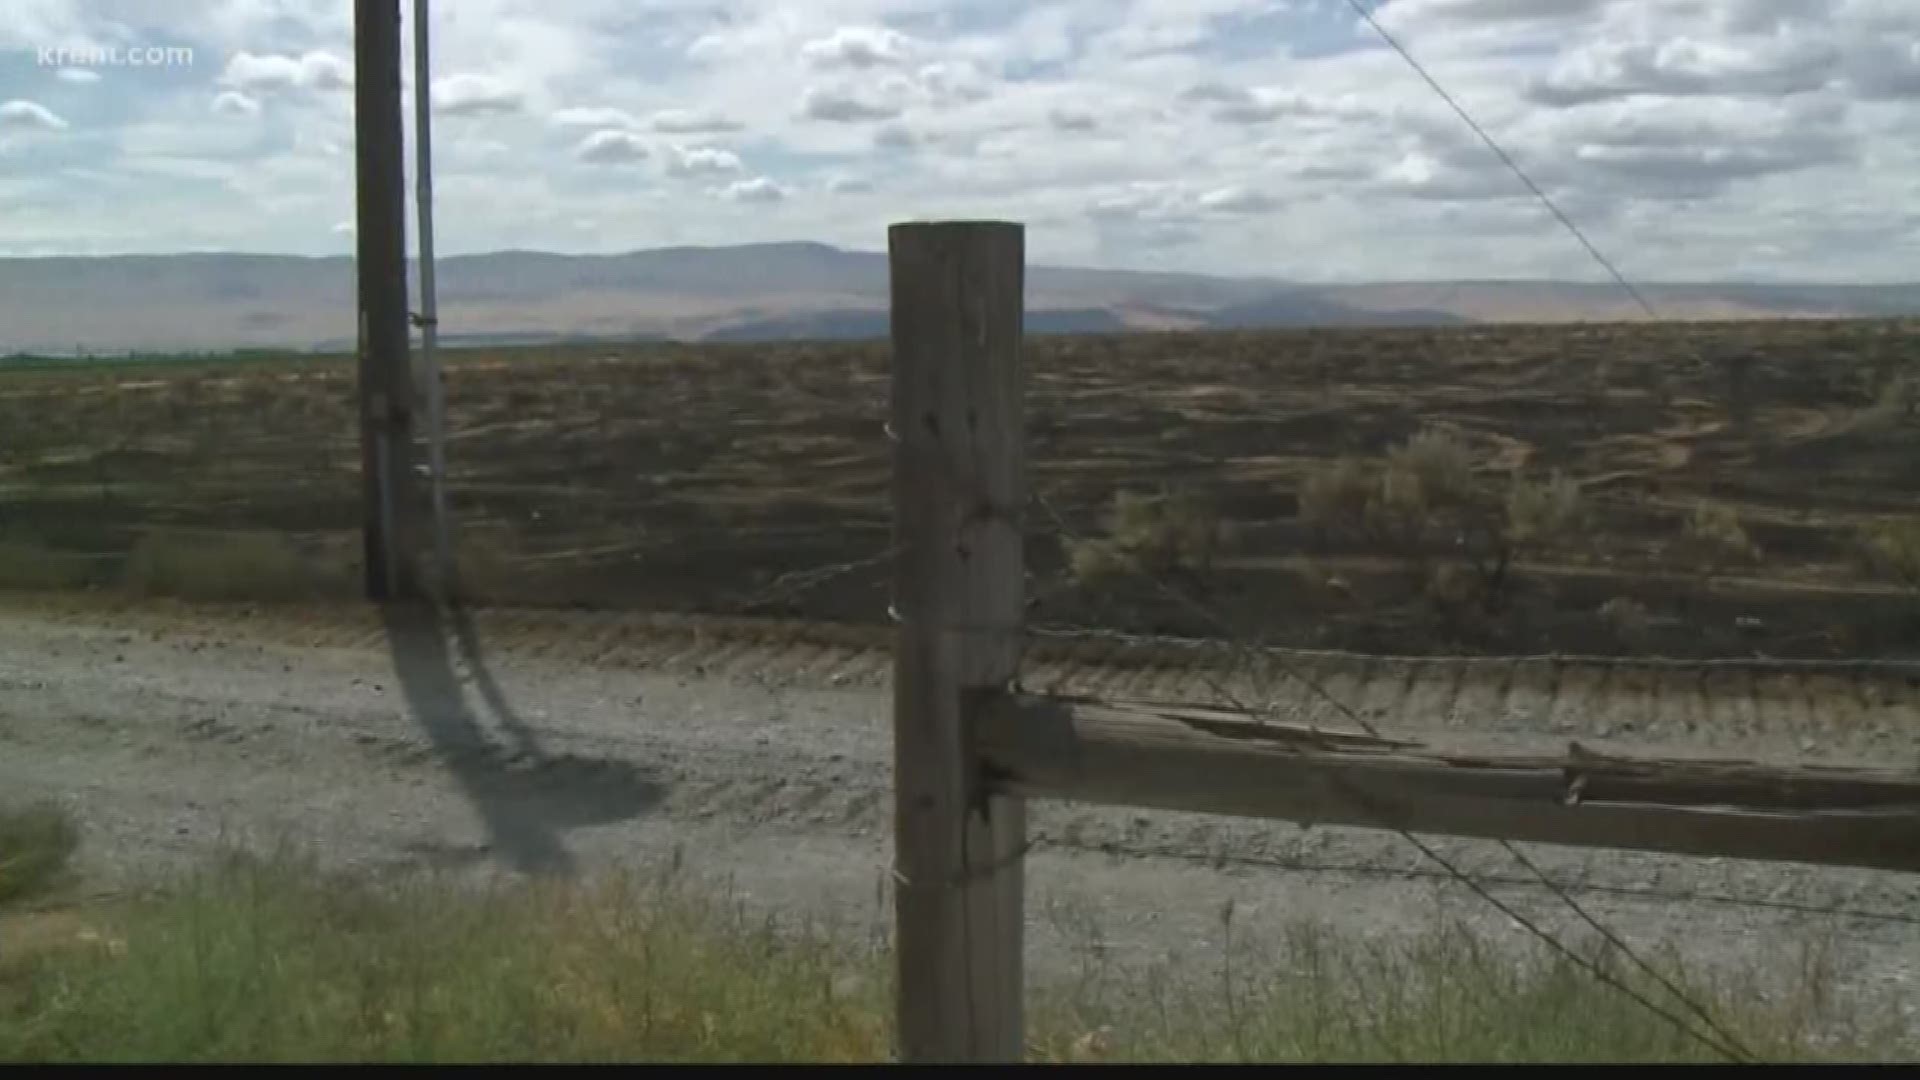 Authorities say the Powerline Fire in Grant County is threatening homes, crops, feedlot and infrastructure. Level 1 and 2 evacuations are in place.